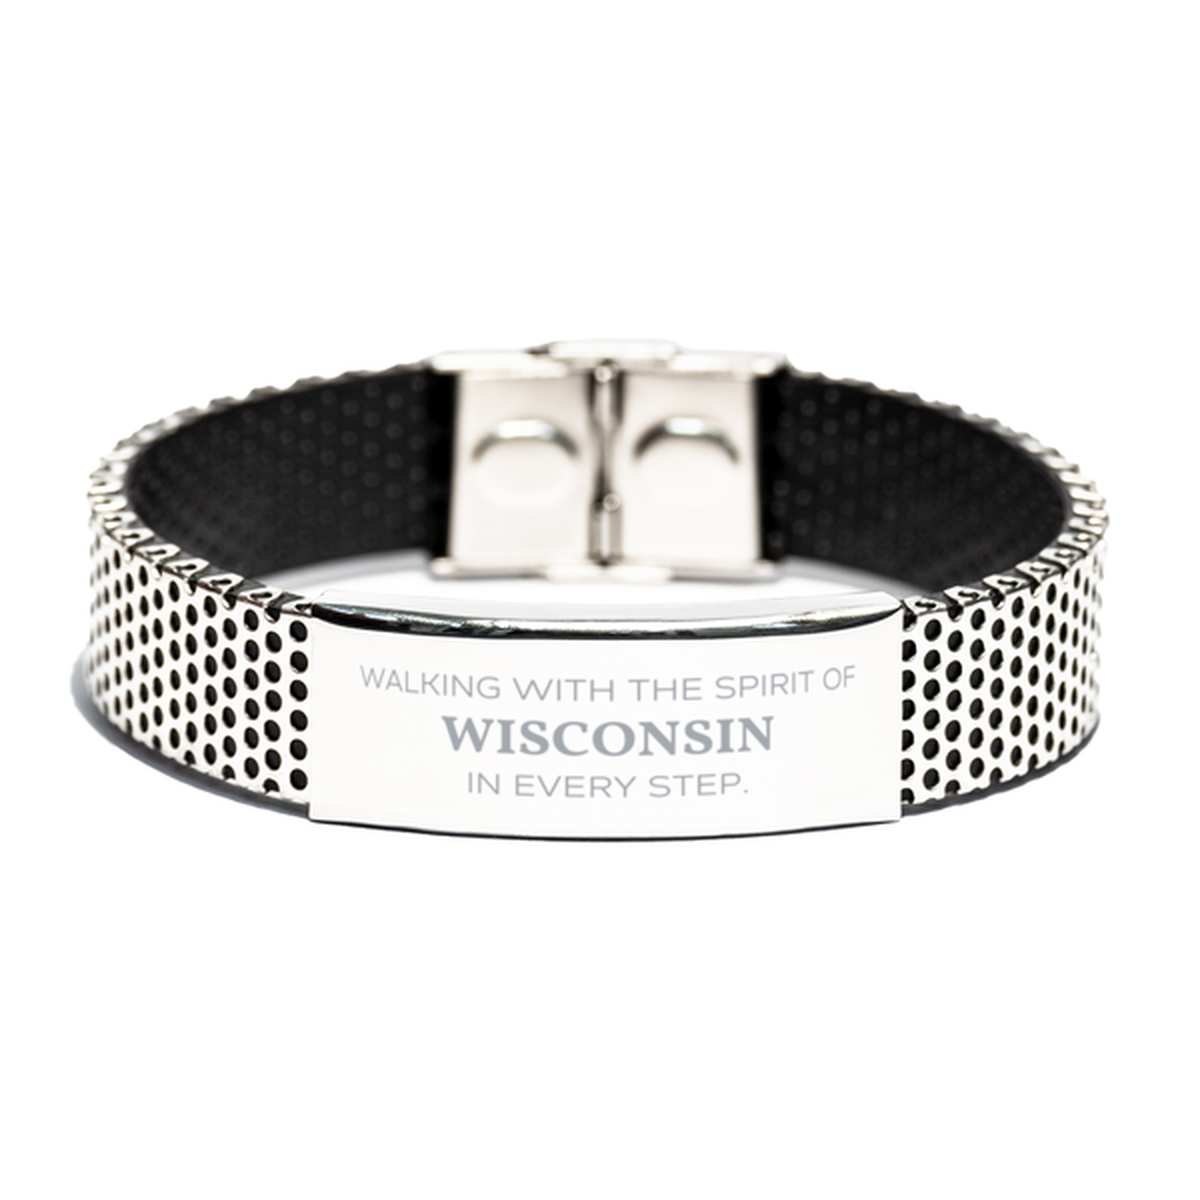 Wisconsin Gifts, Walking with the spirit, Love Wisconsin Birthday Christmas Stainless Steel Bracelet For Wisconsin People, Men, Women, Friends